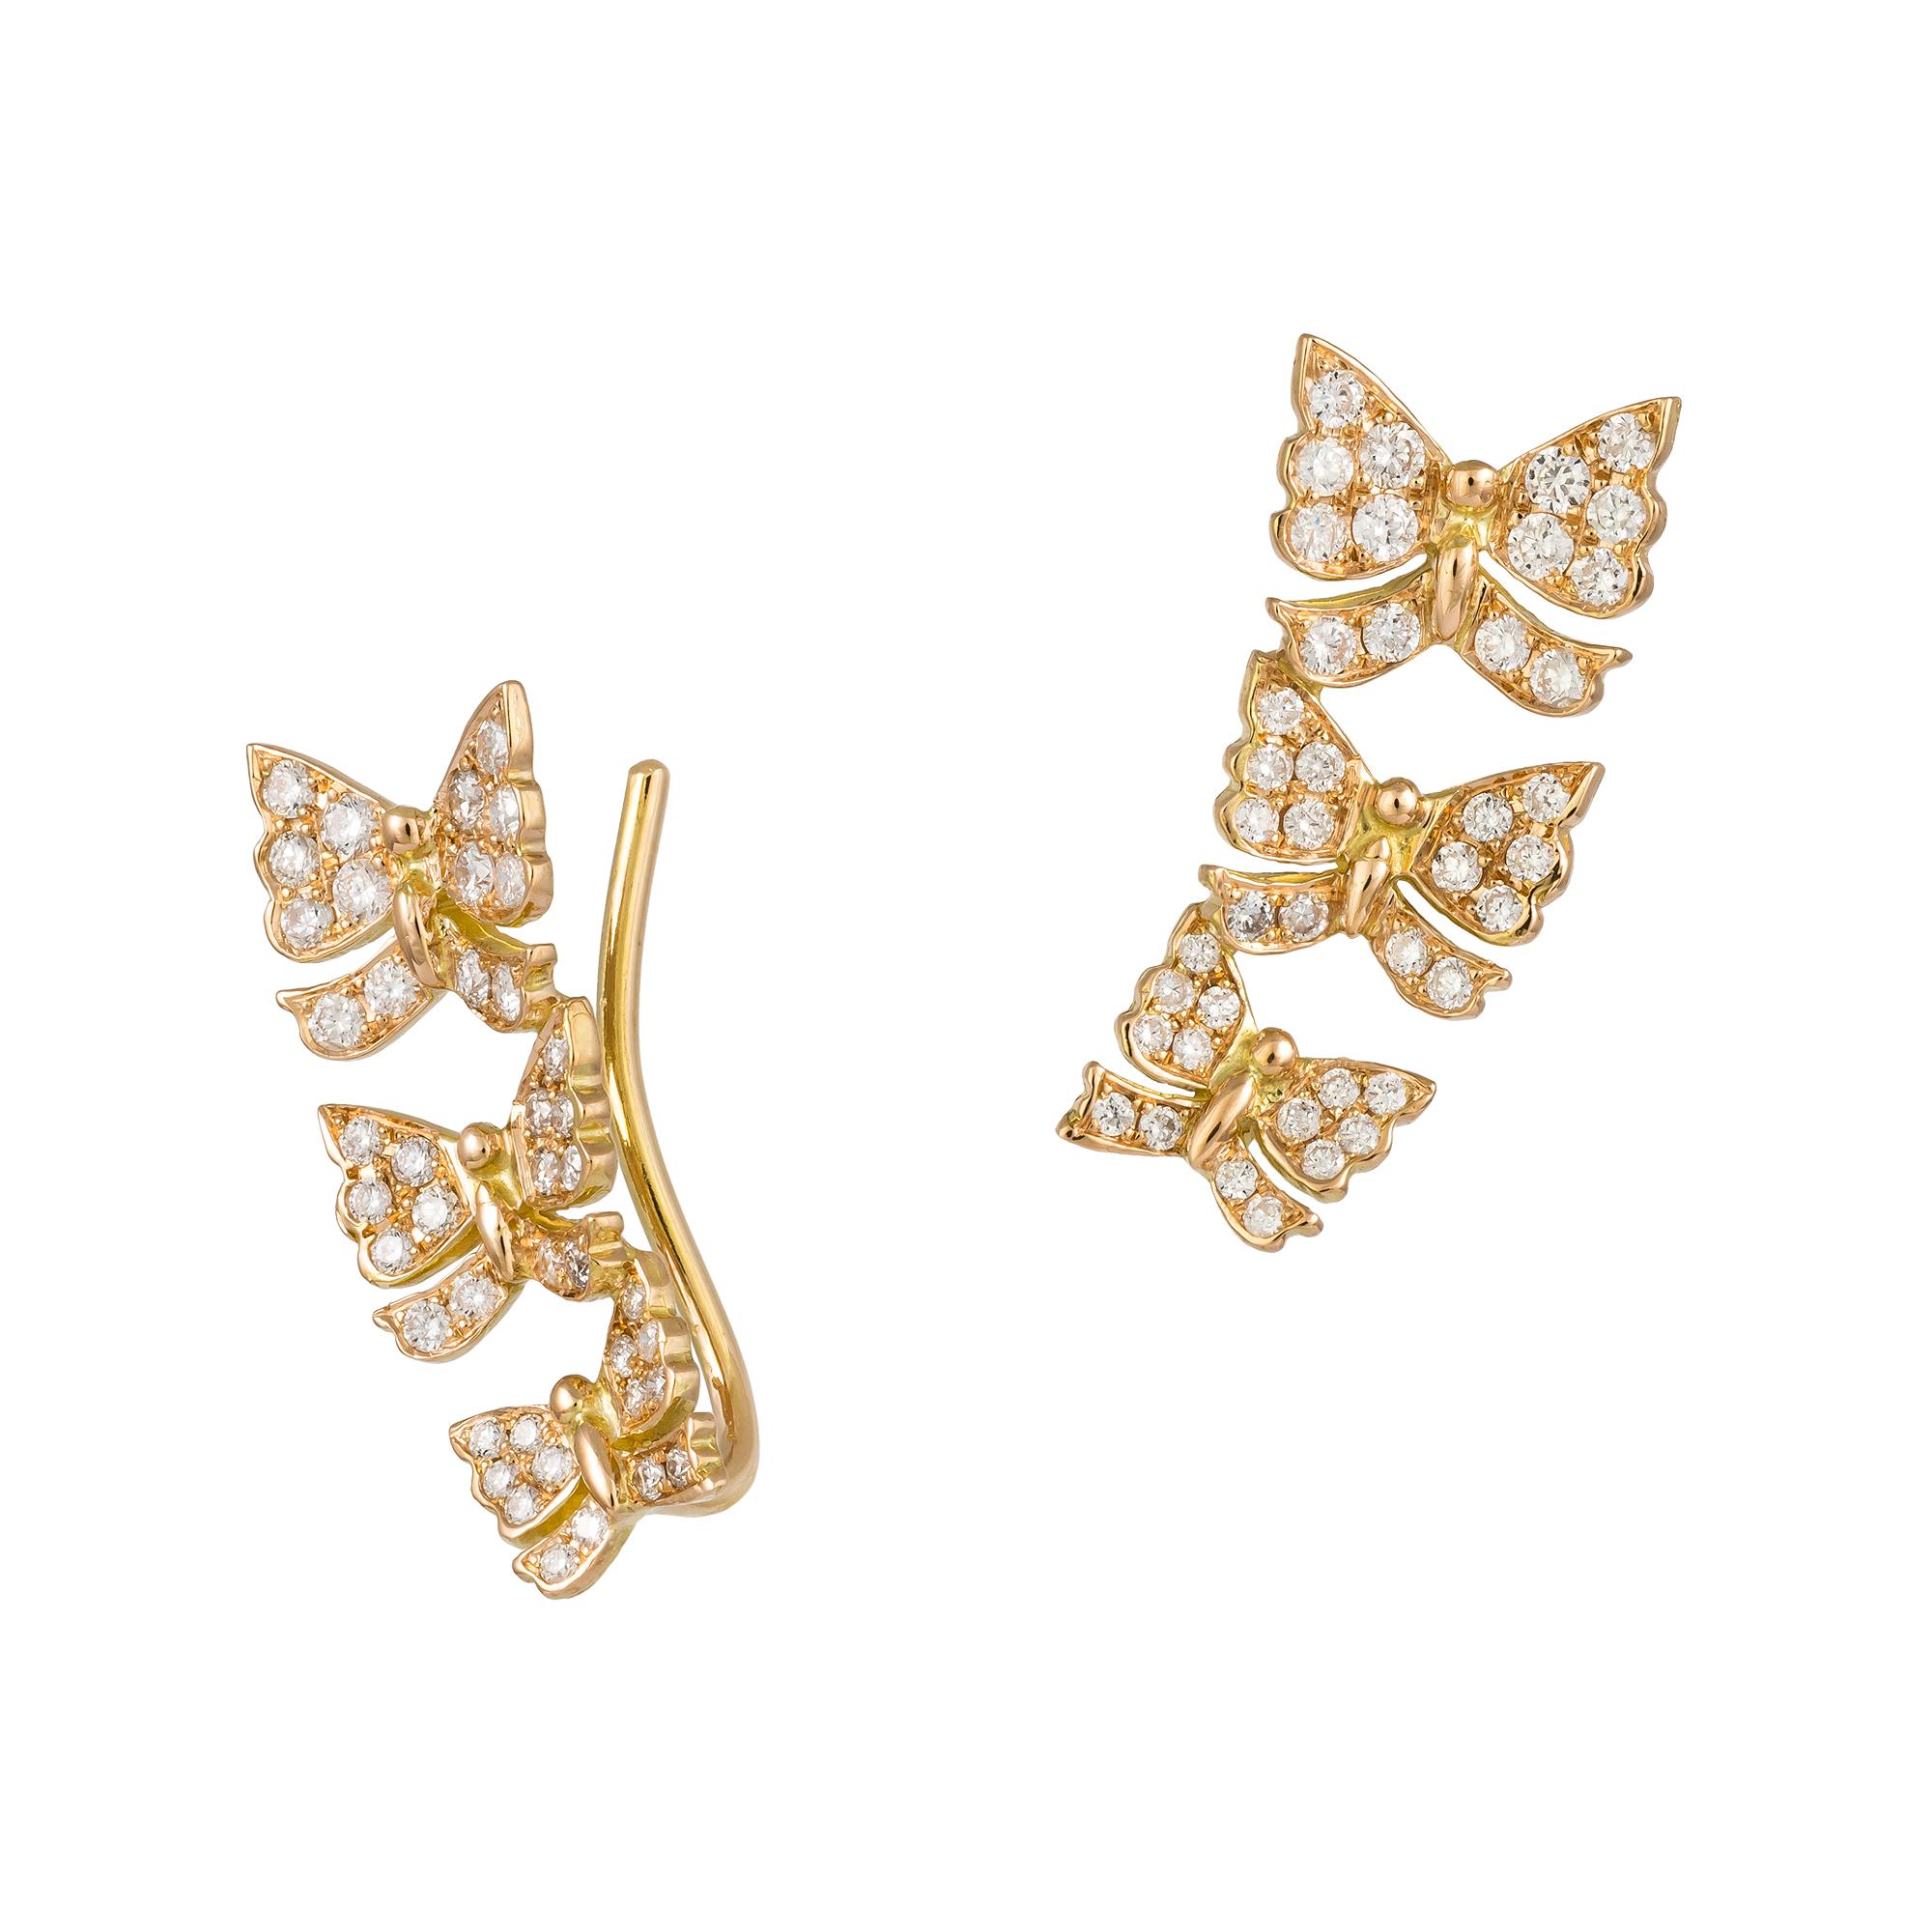 Earrings Yellow Gold 18 K

Diamonds 0.63 Cts/84 Pcs
Weight 2,93 grams

With a heritage of ancient fine Swiss jewelry traditions, NATKINA is a Geneva based jewellery brand, which creates modern jewellery masterpieces suitable for every day life.
It